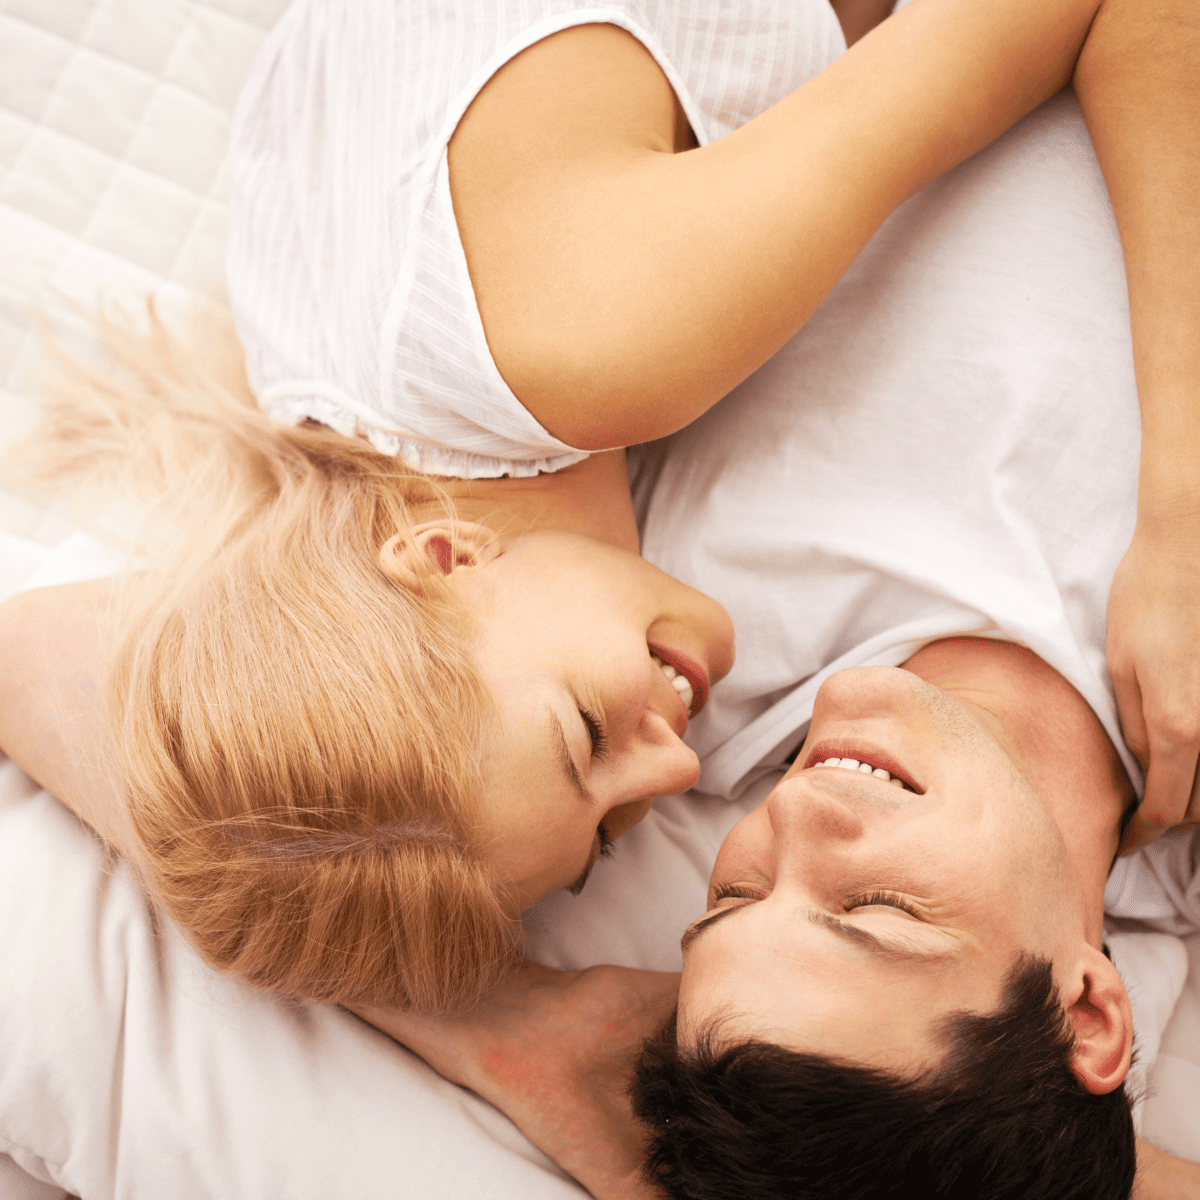 100+ Dirty Questions to Ask Your Boyfriend That Will Turn Him On -  PairedLife